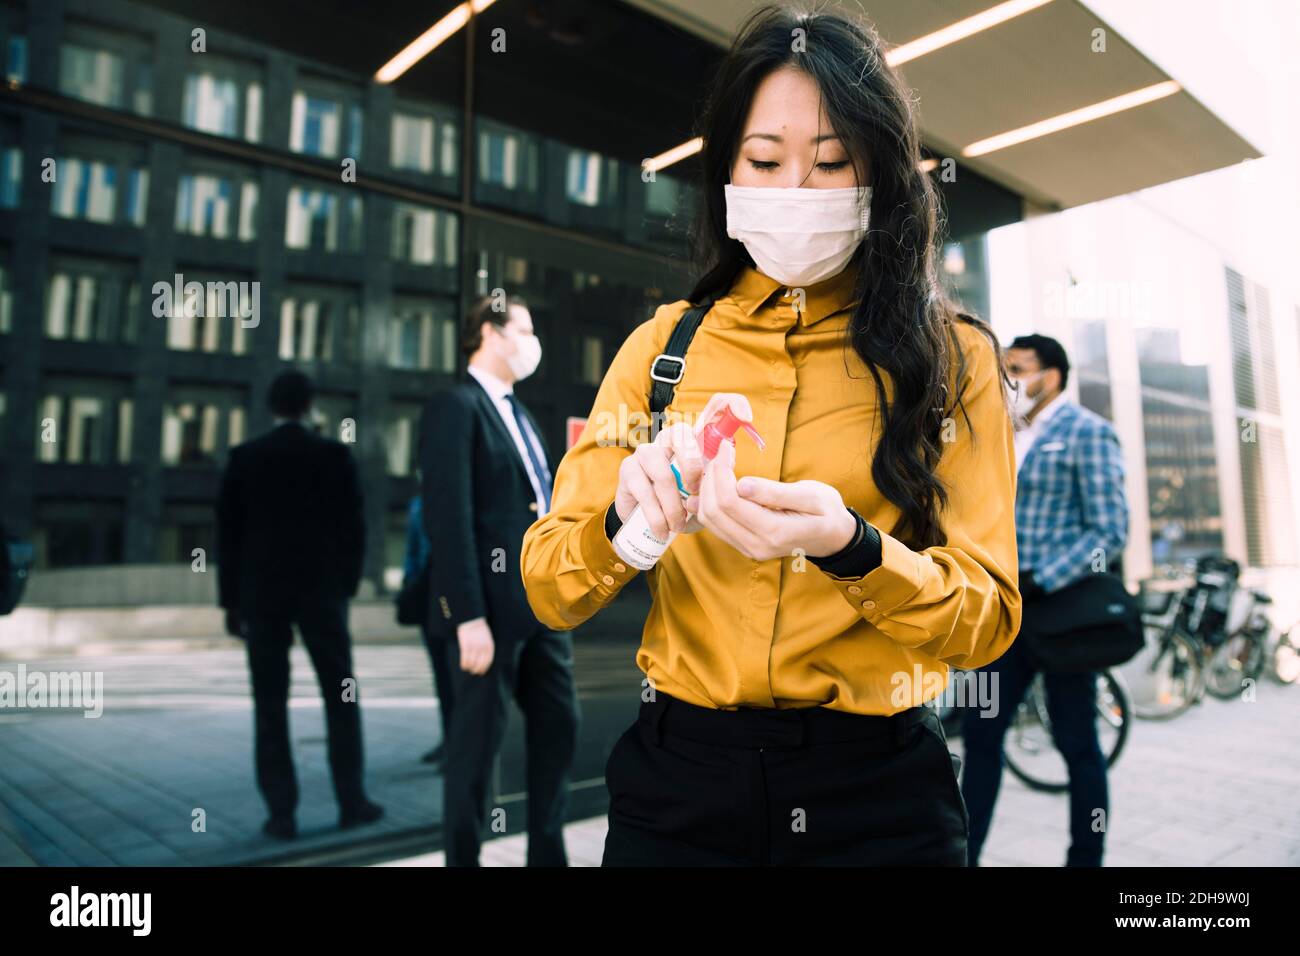 Woman with face mask using hand sanitizer Stock Photo